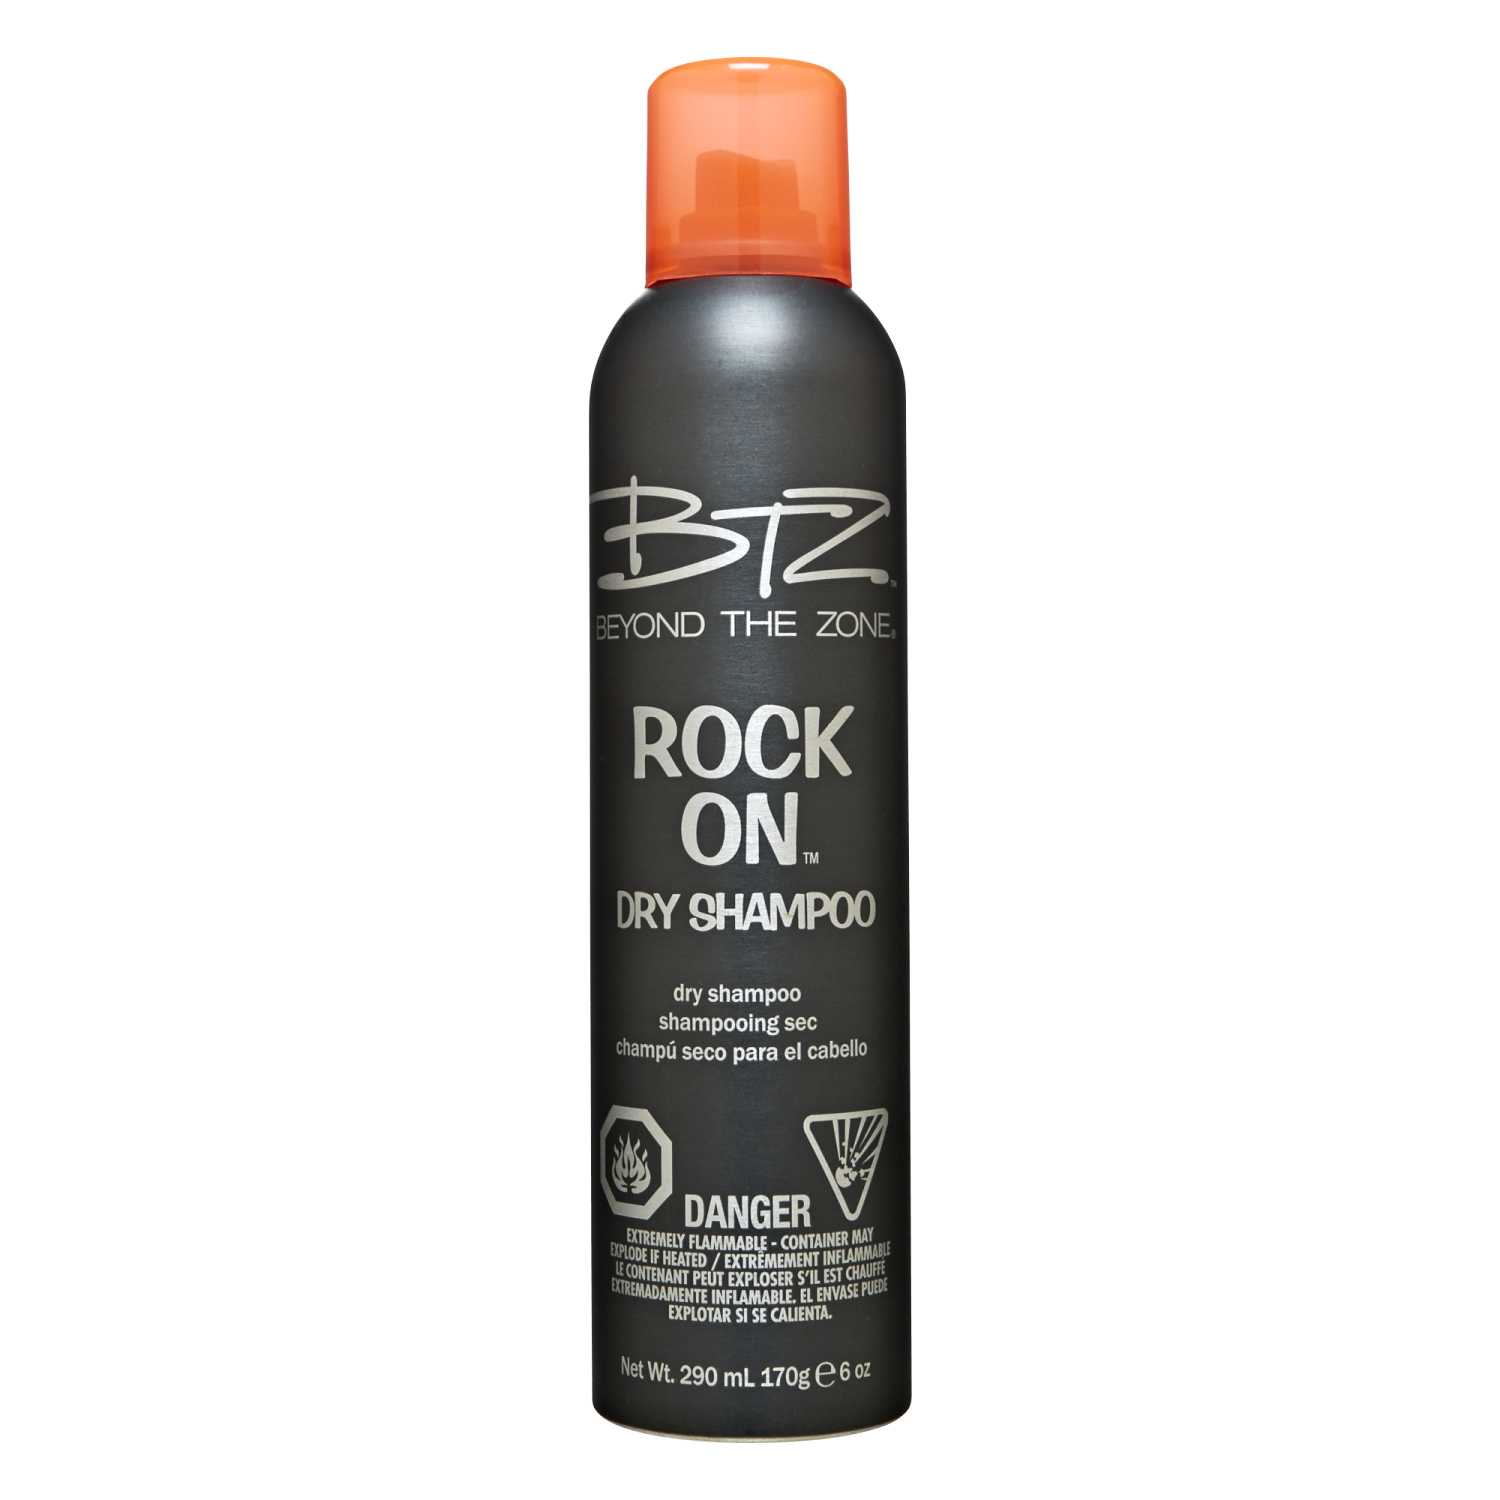 Highly concentrated shampoo f